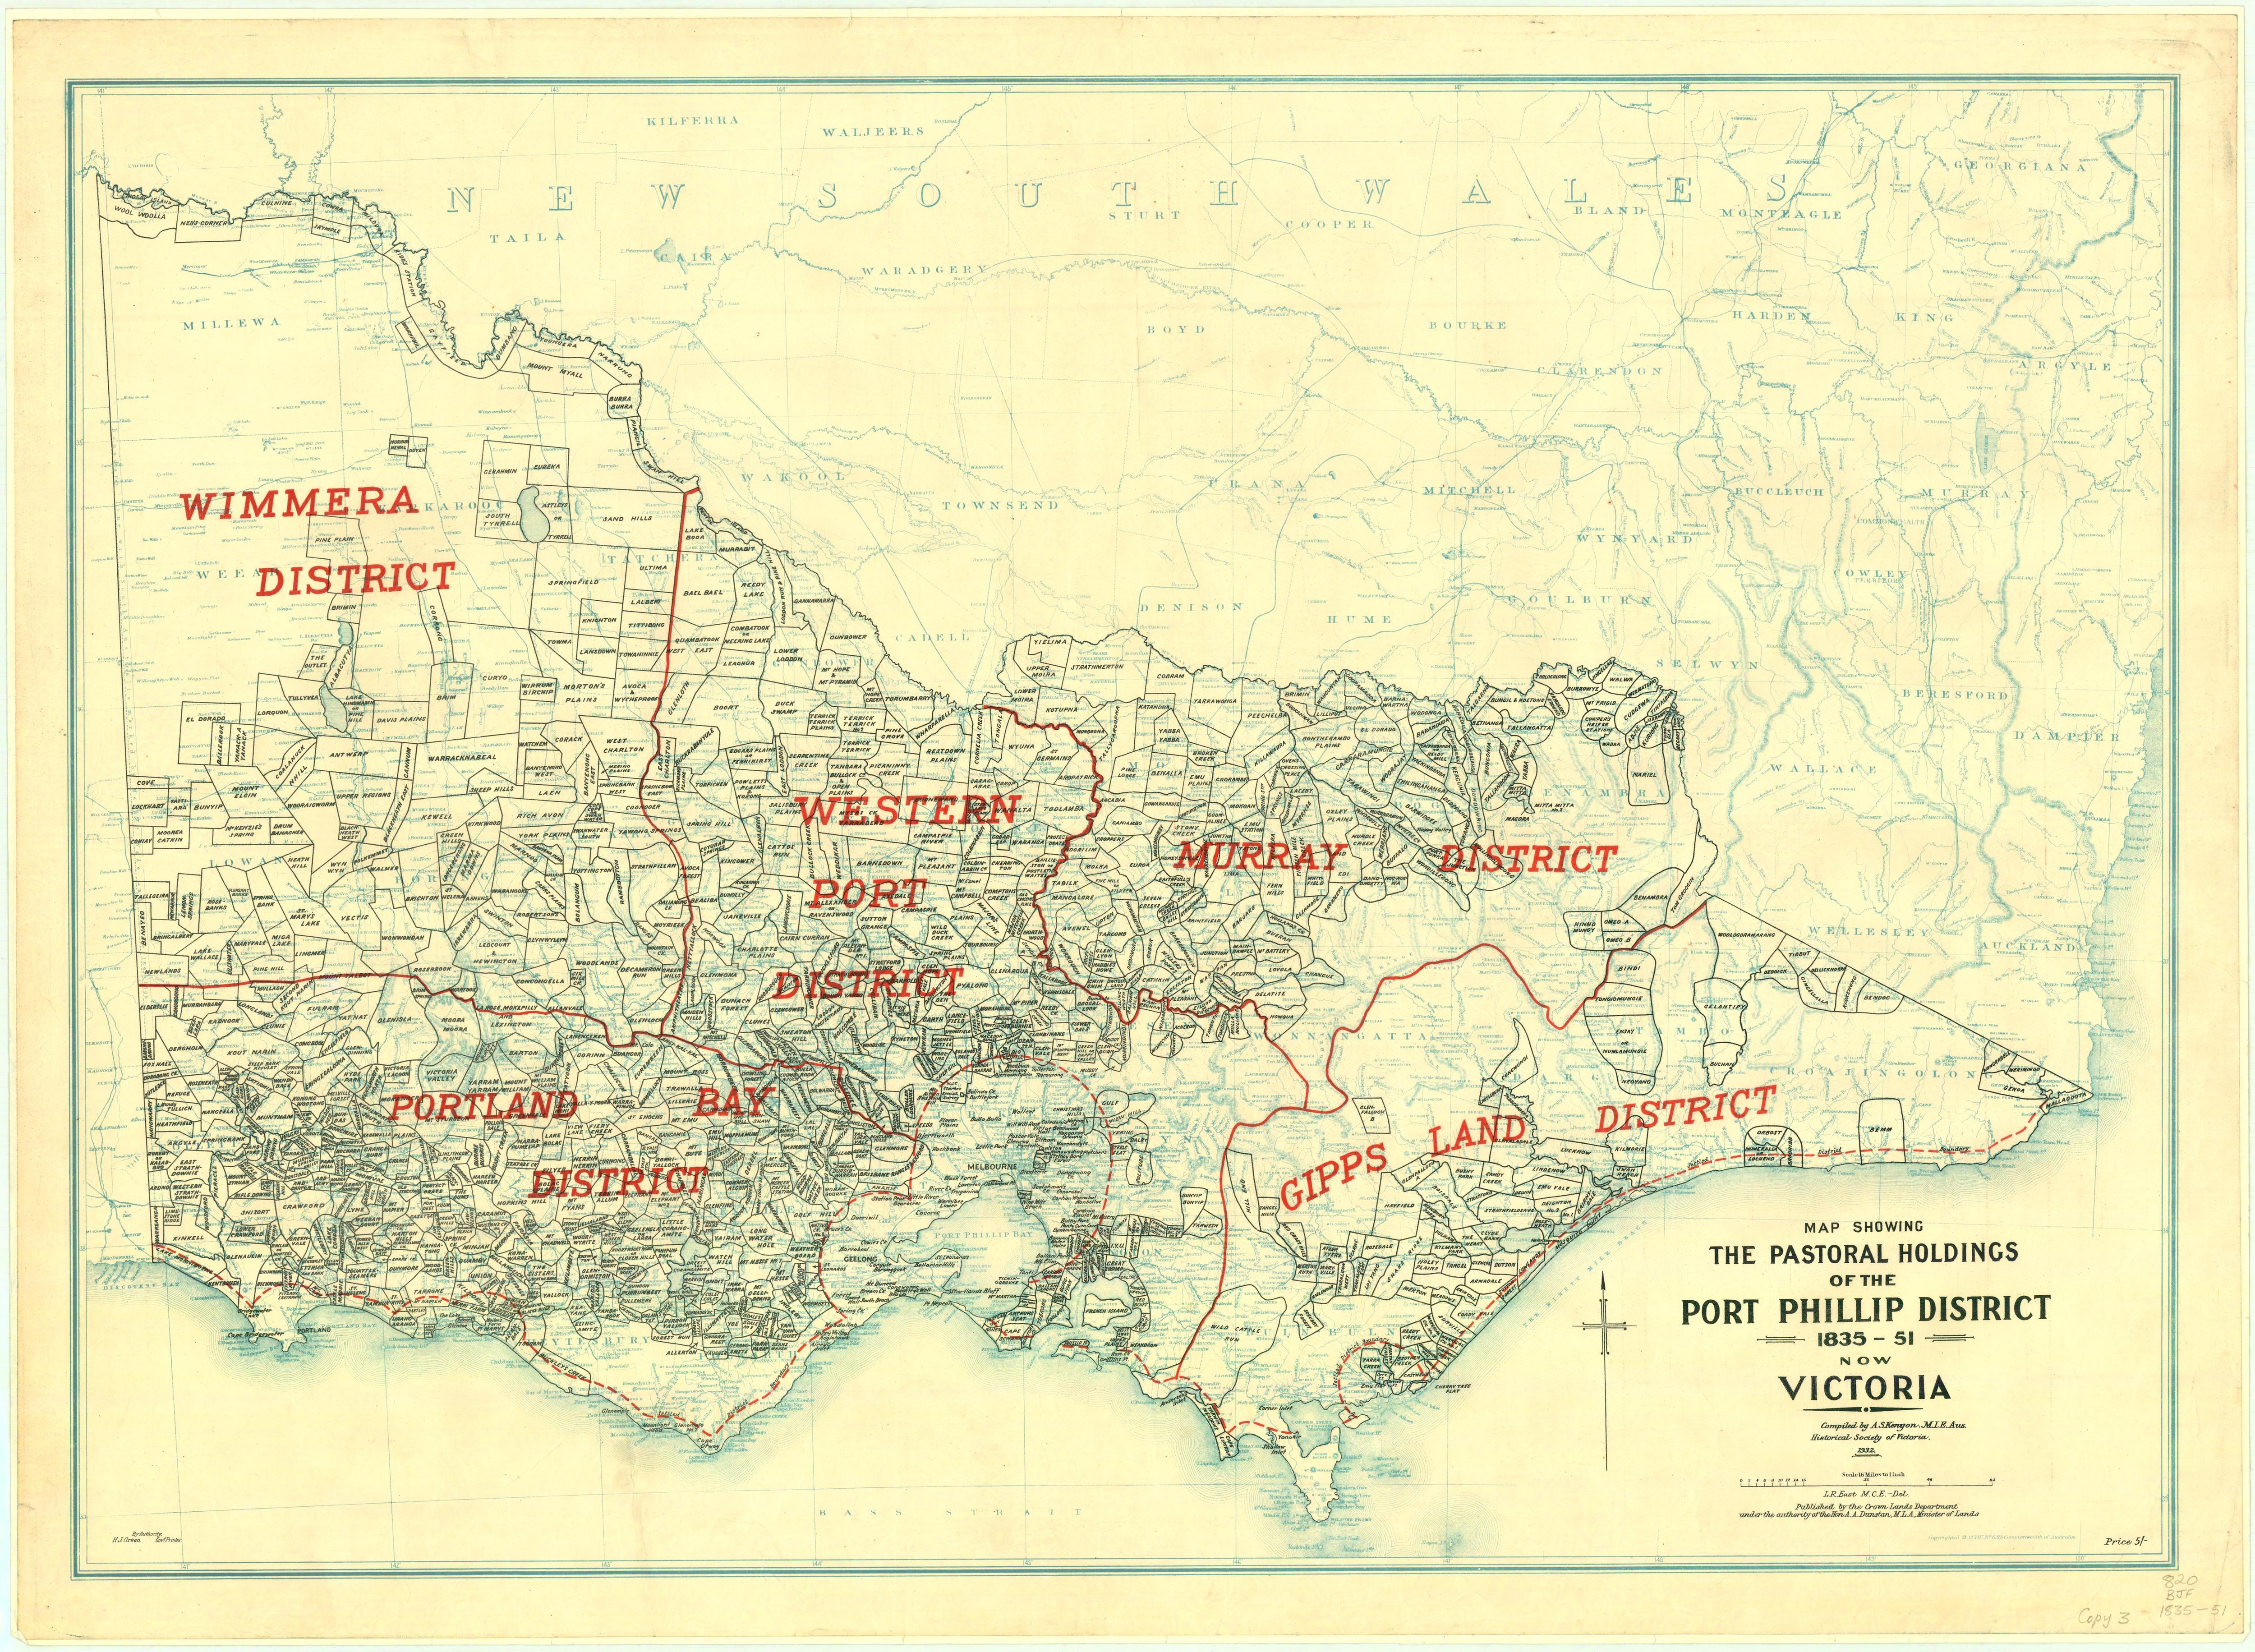 A map showing smaller boundaries within Victoria which are the pastoral holdings.